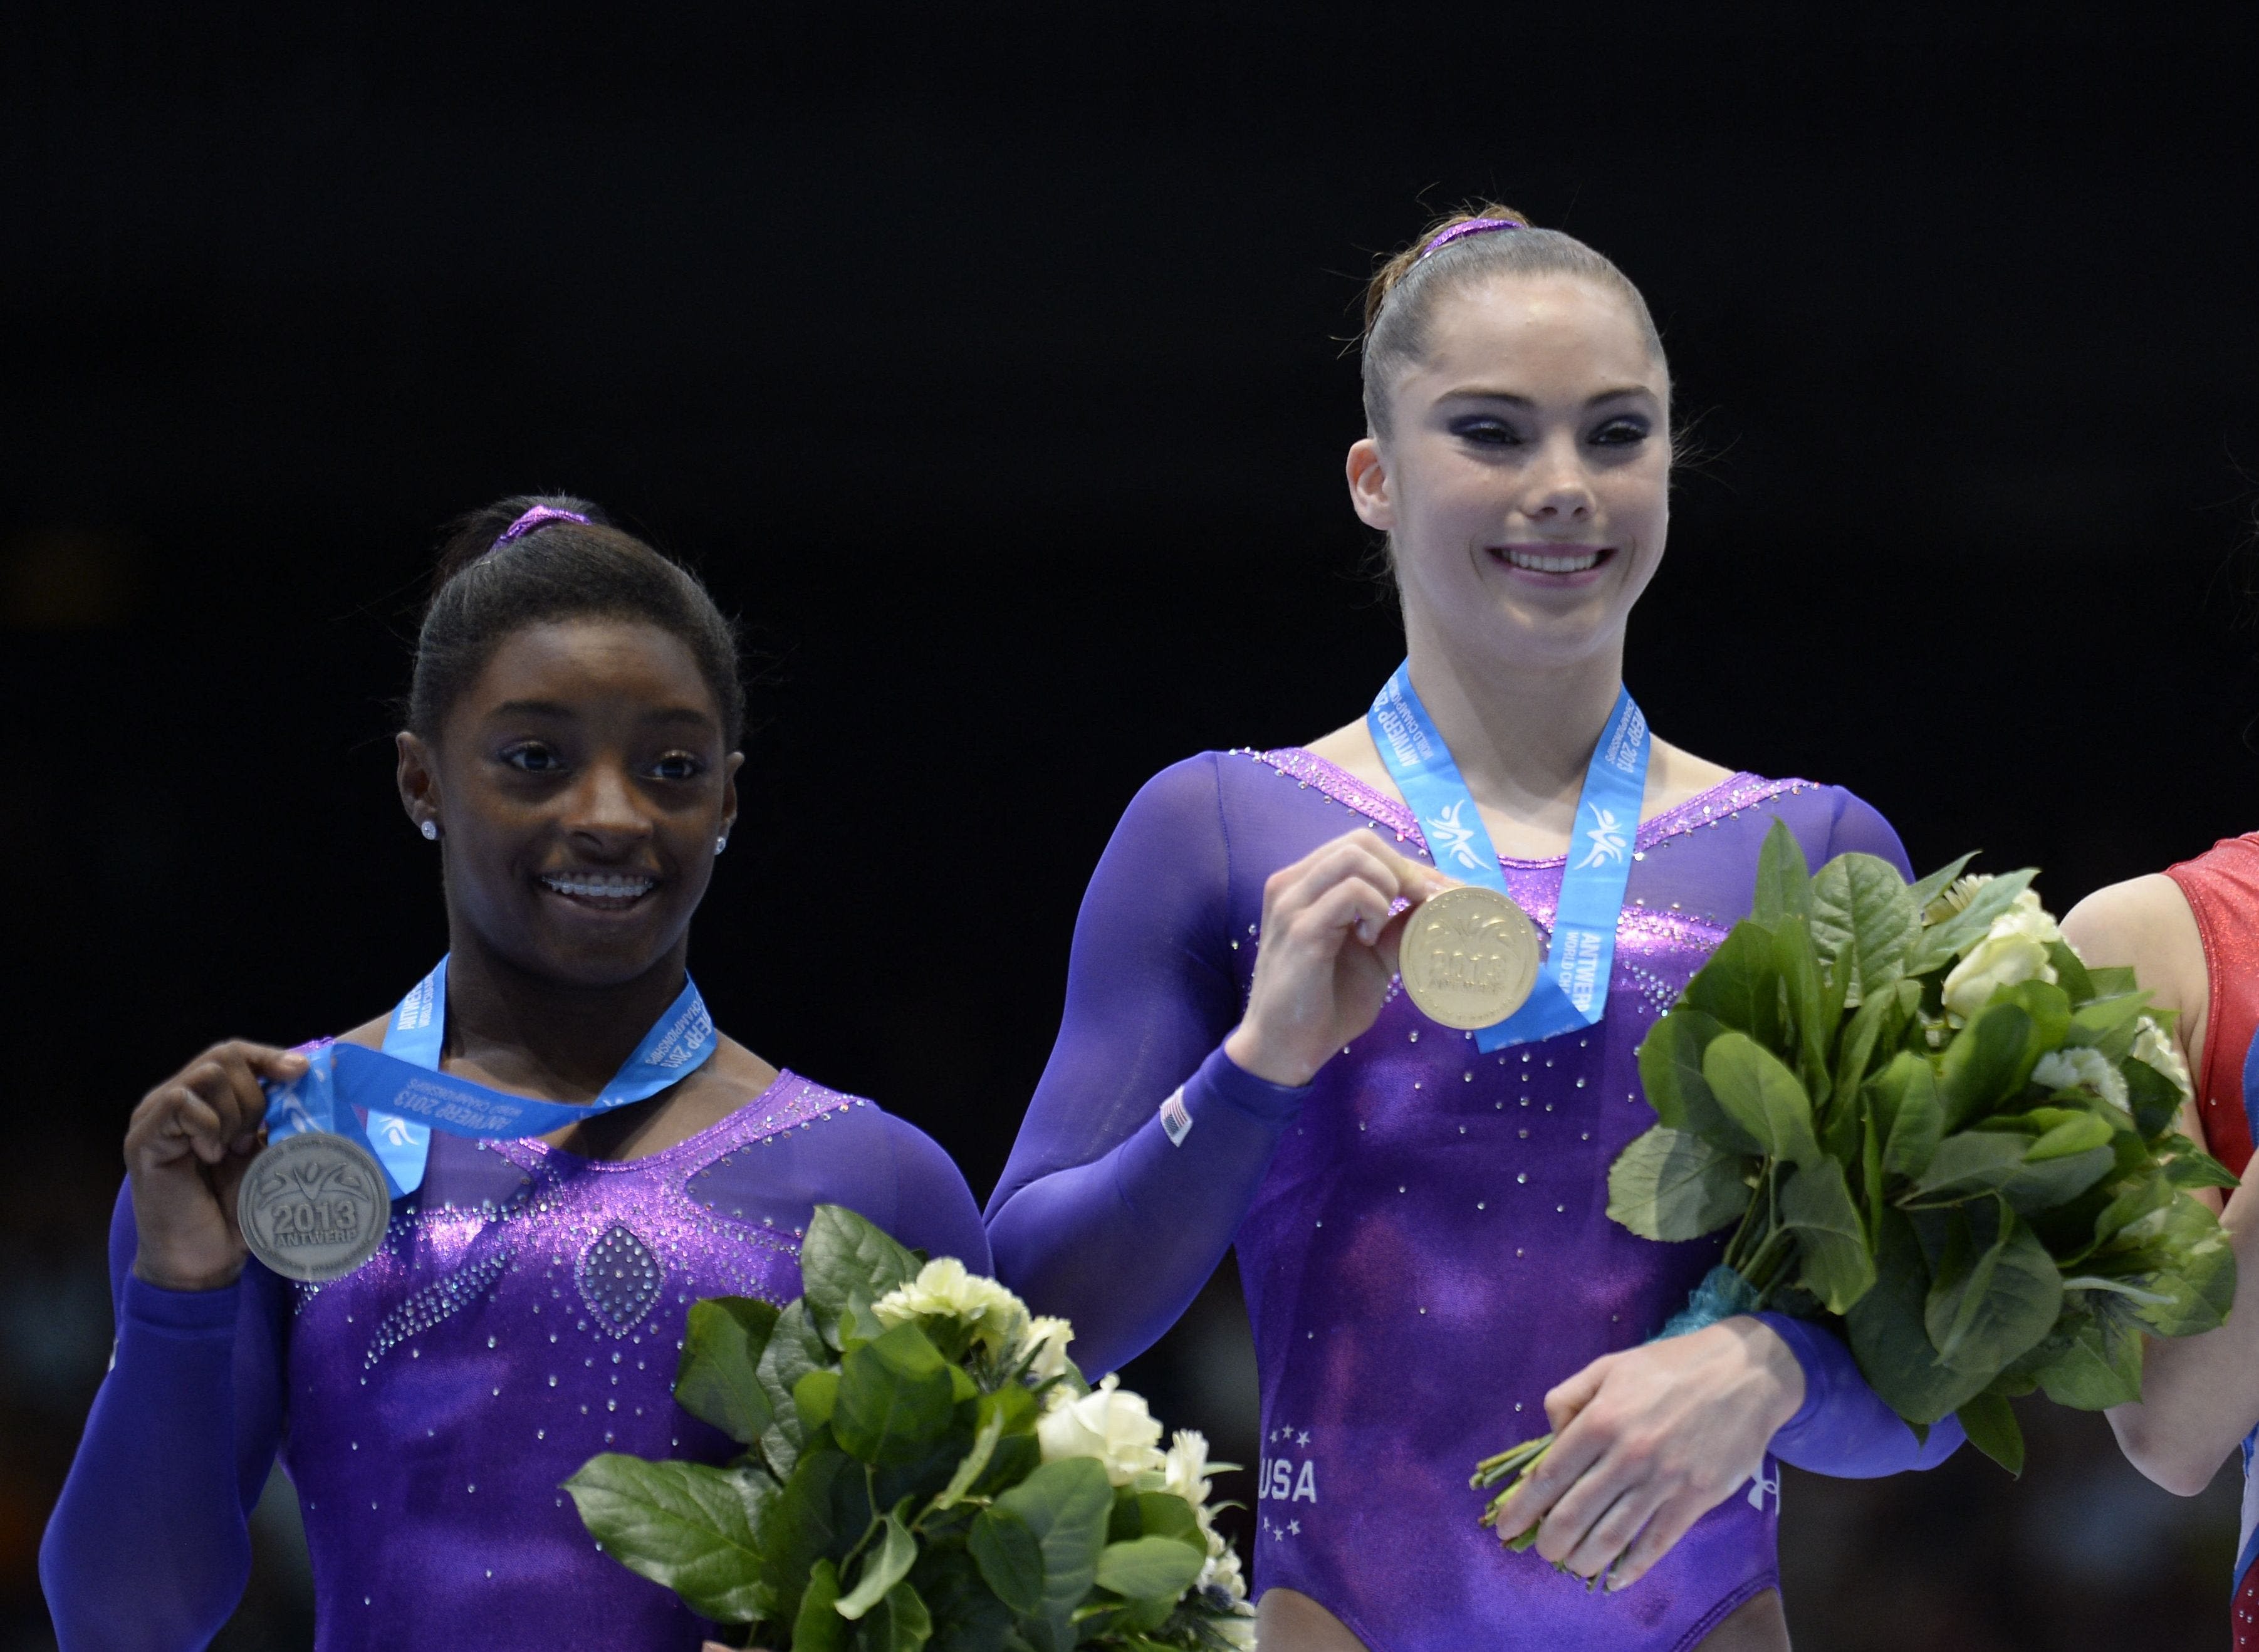 McKayla Maroney quickly reminded fans she's not the MyKayla who Simone Biles trolled after winning gold